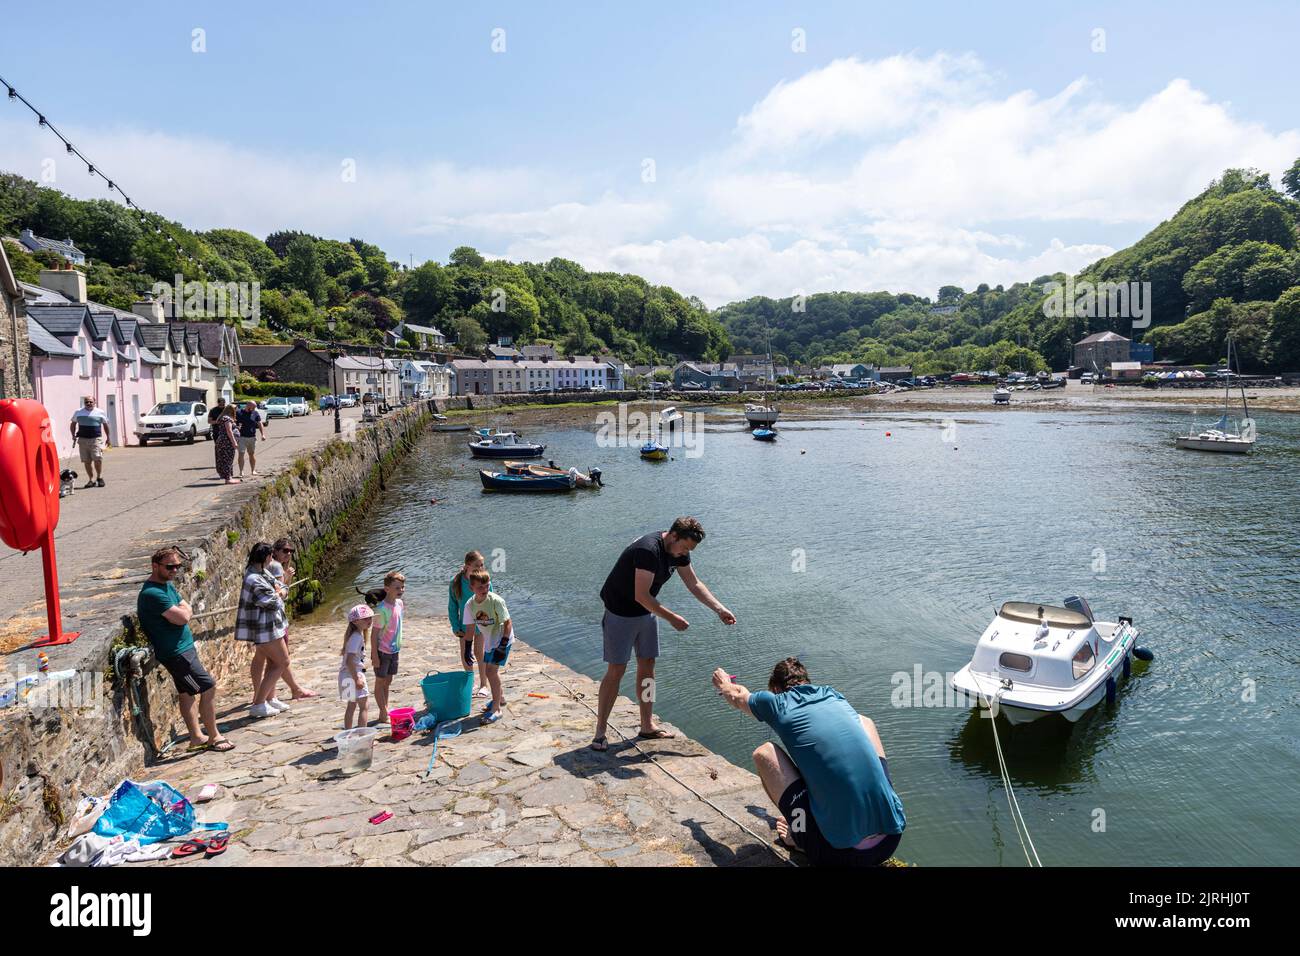 Family fishing in Quay st, Village of Fishguard, Pembrokeshire, Wales, UK Stock Photo